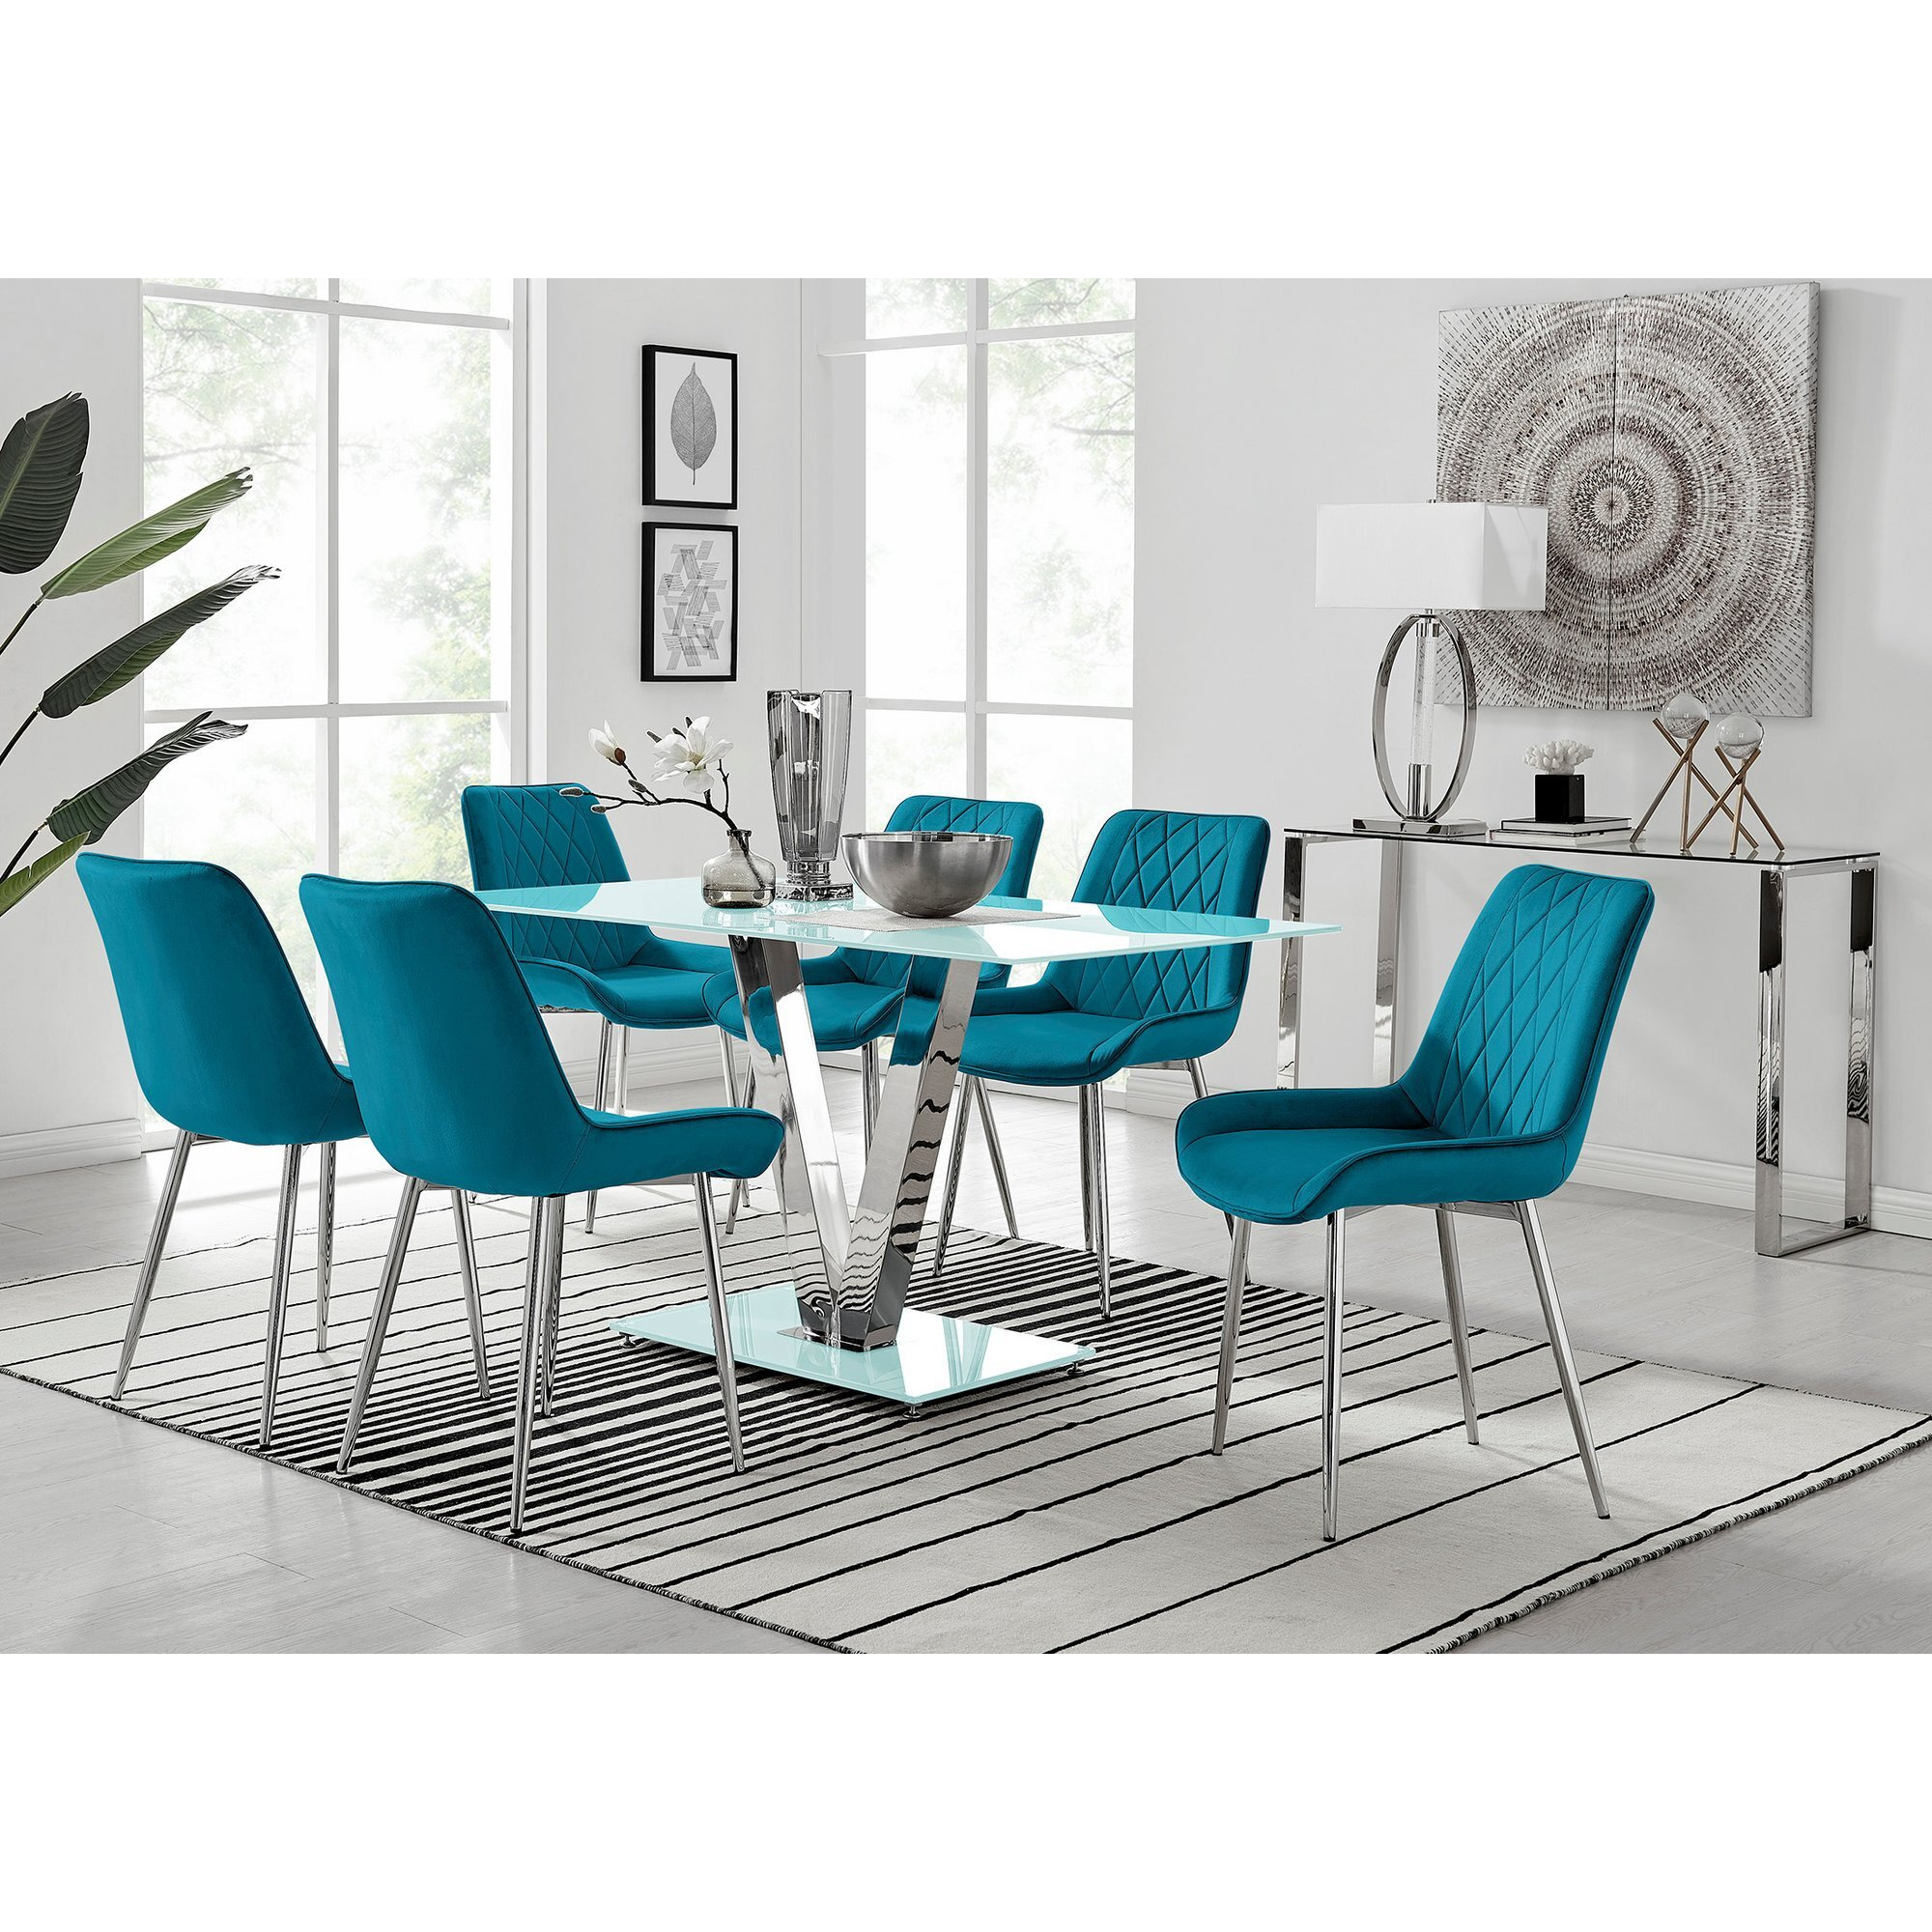 Florini V White Dining Table and 6 Pesaro Silver Leg Chairs